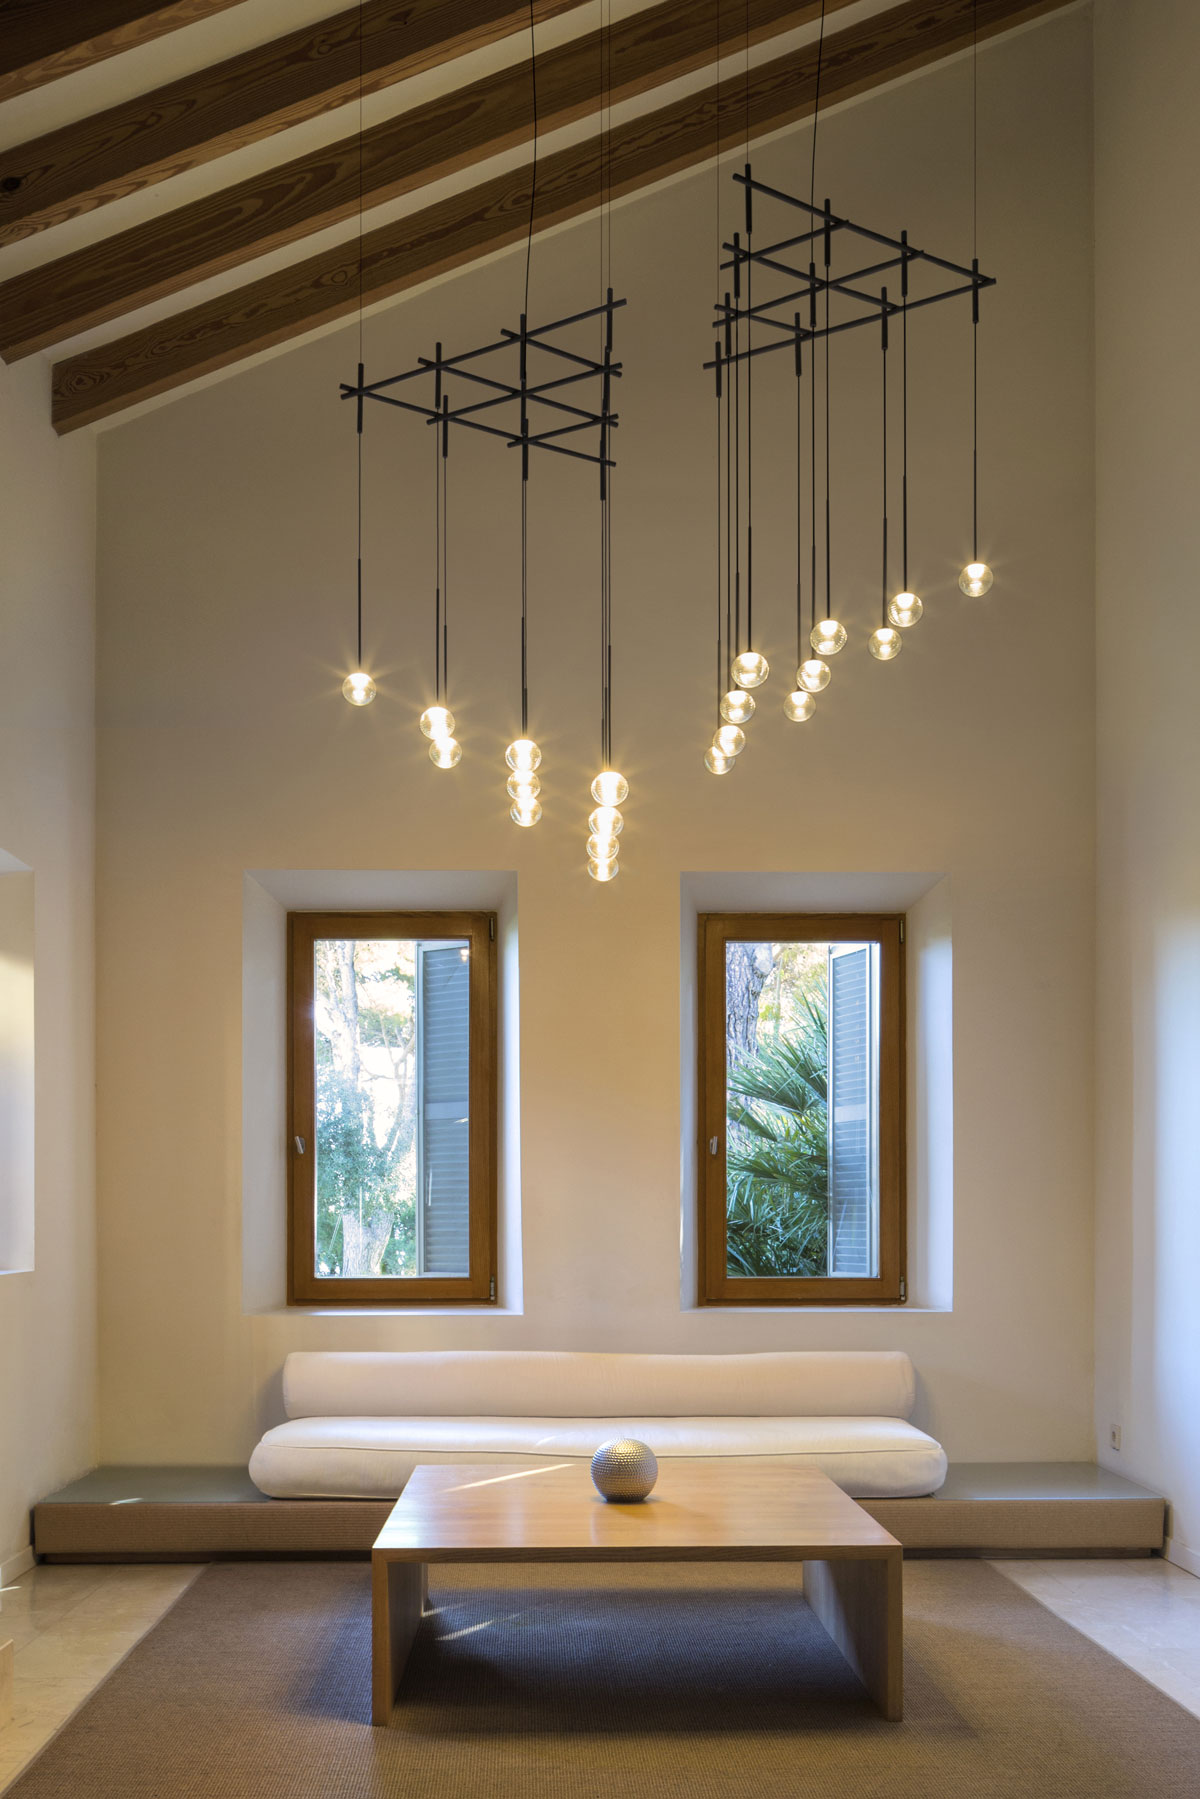 Vibia The Edit - Make A Design Statement With Dazzling Chandeliers - Algorithm